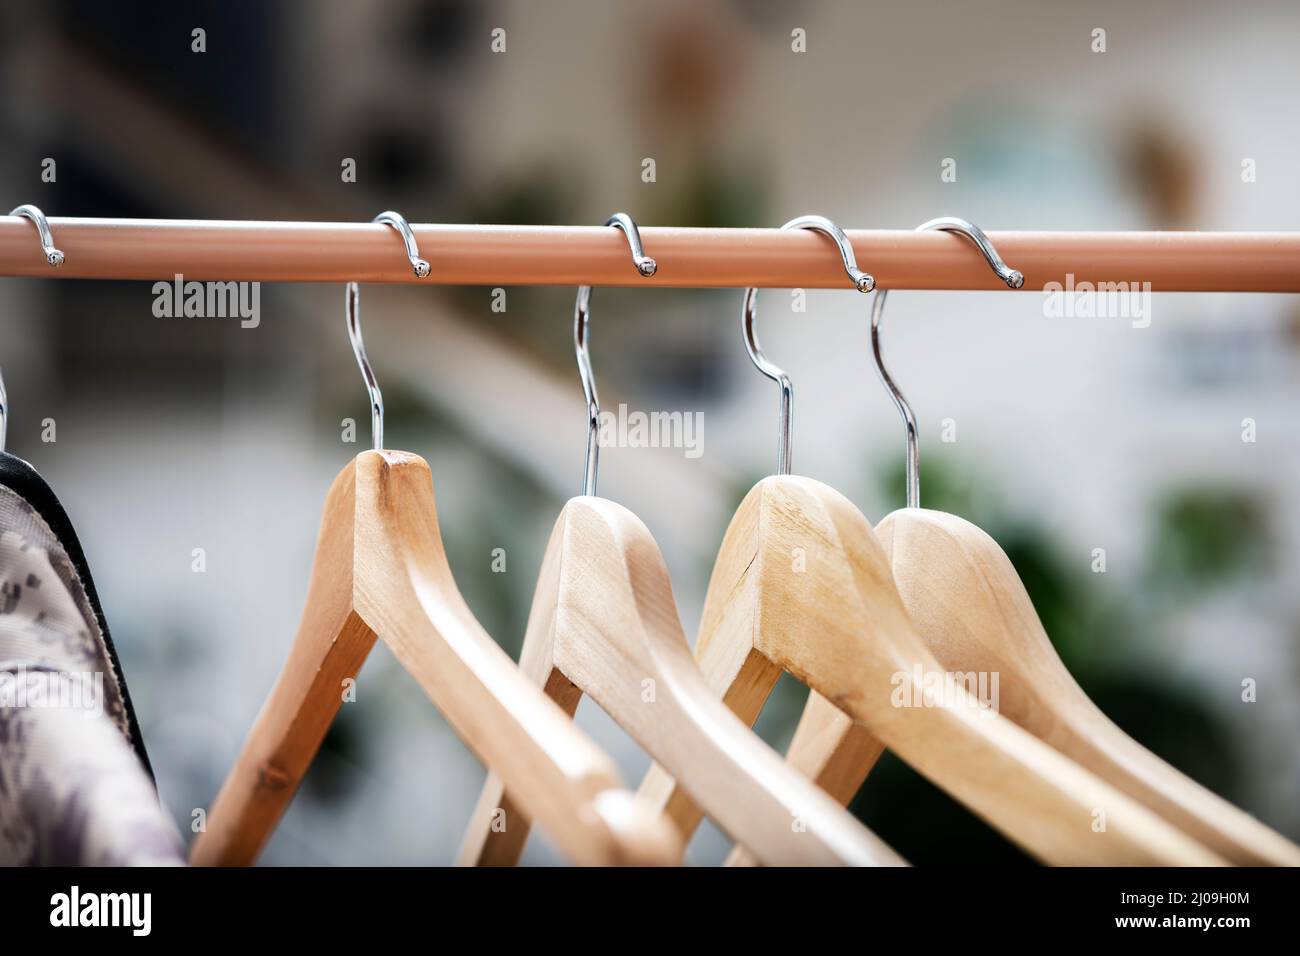 Wooden hangers to hang clothes on a light brown coat rack Stock Photo